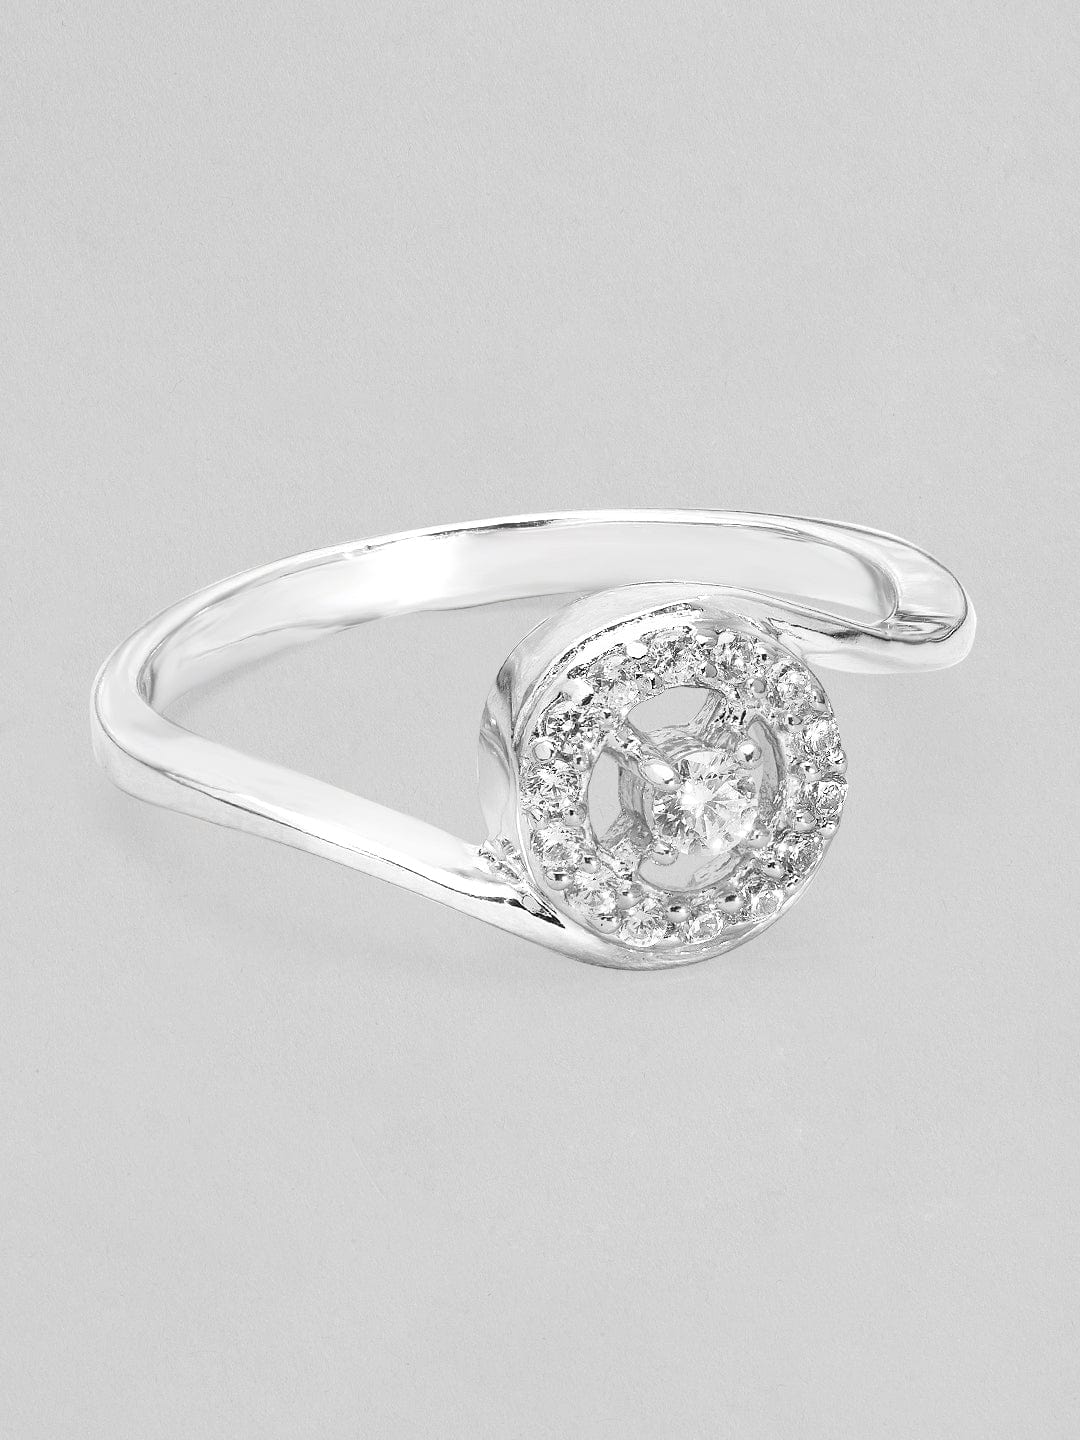 Rubans 925 Silver The Timeless Classic Design Ring. Rings